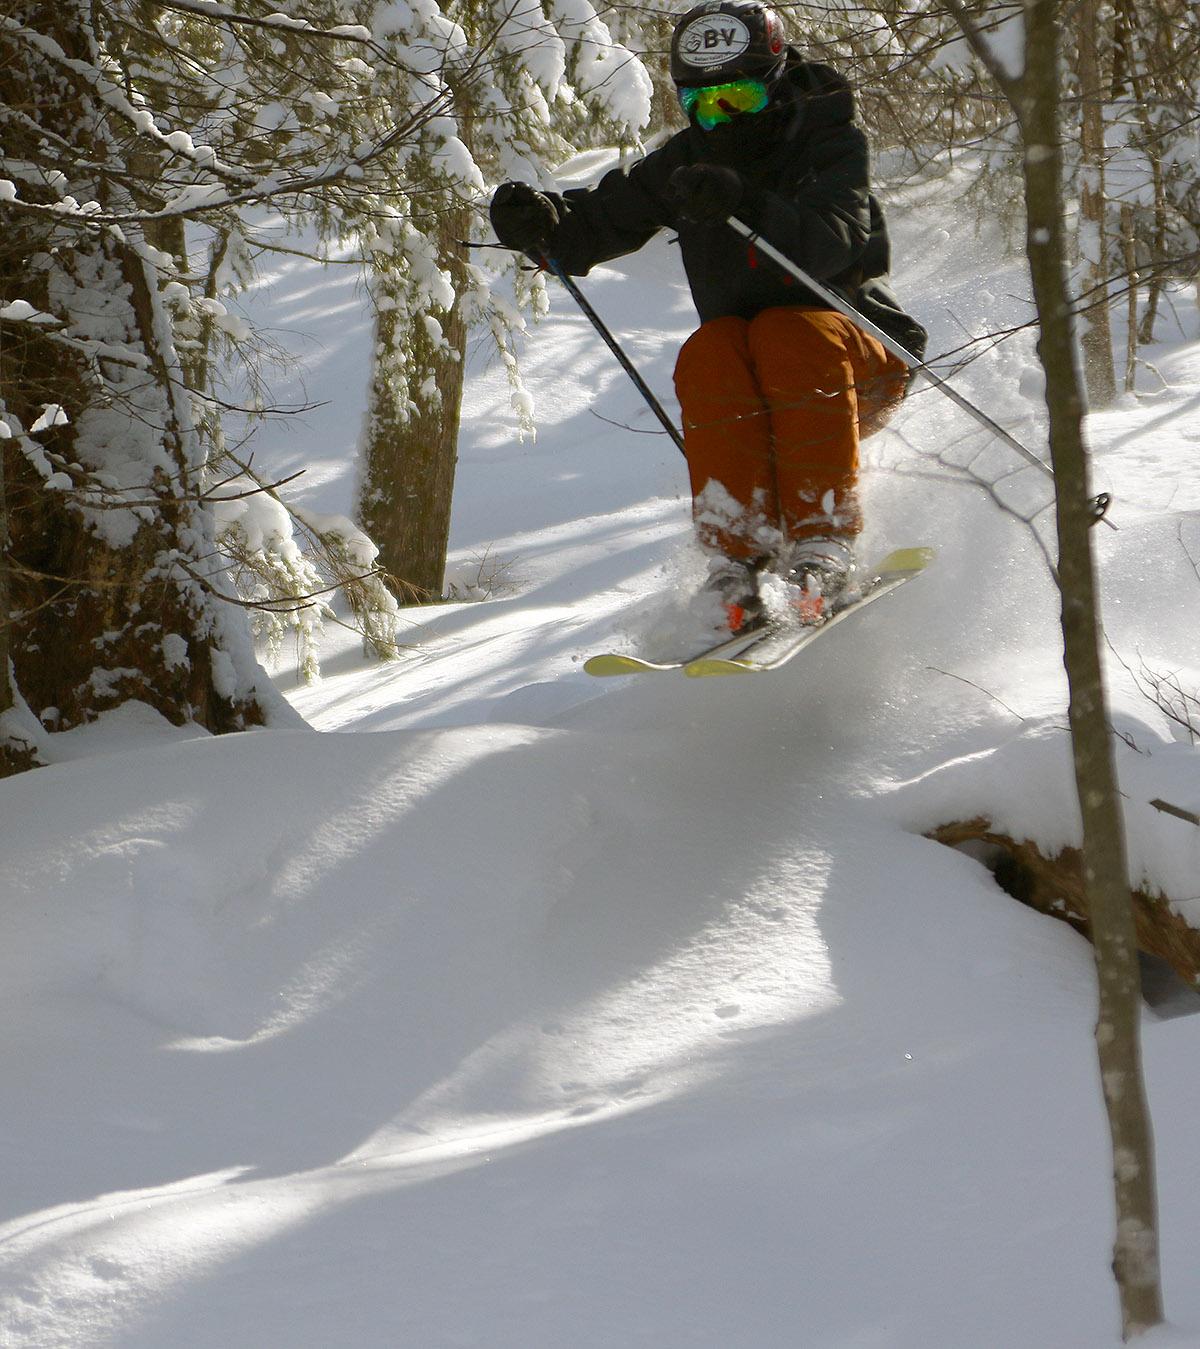 An image of Ty jumping while skiing the Wood's Hole area of Bolton Valley Ski Resort in Vermont